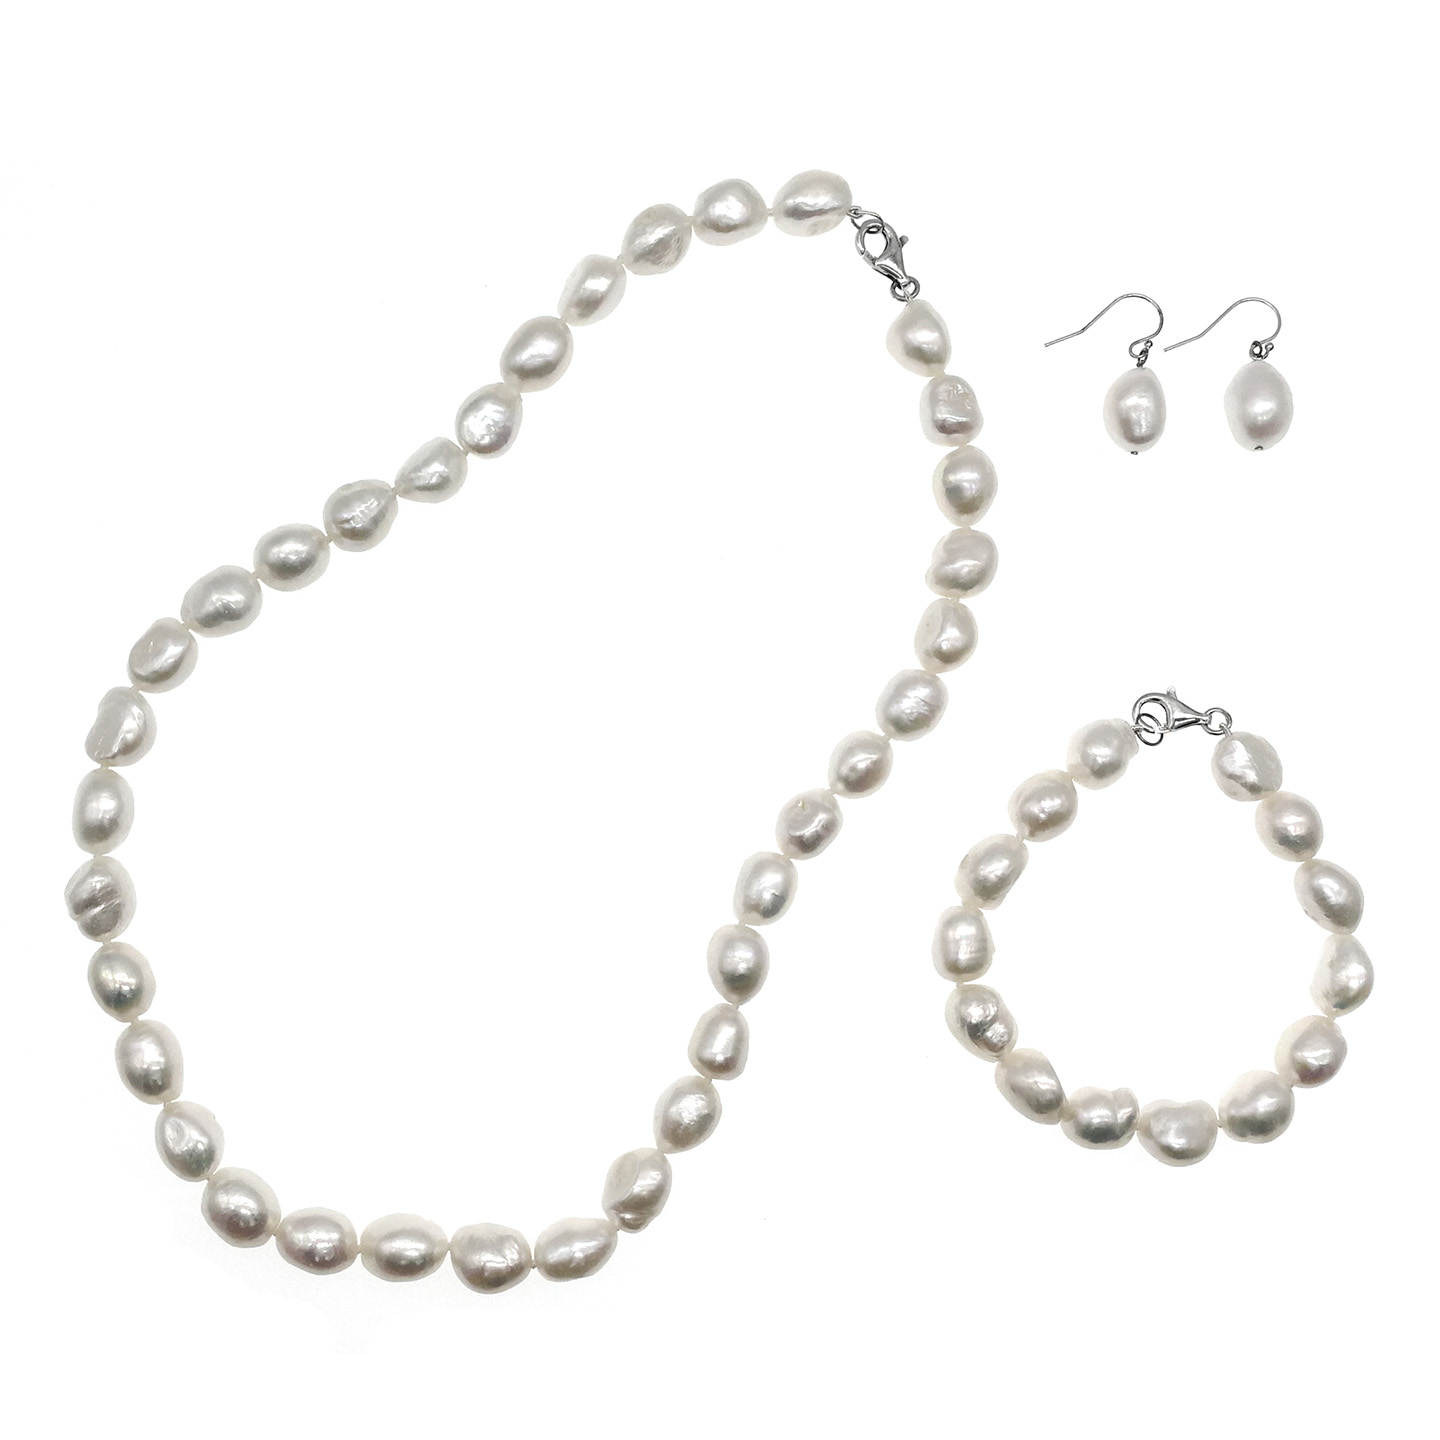 11-12mm Freshwater Pearl with 925 Silver Necklace, Bracelet & Earring Set